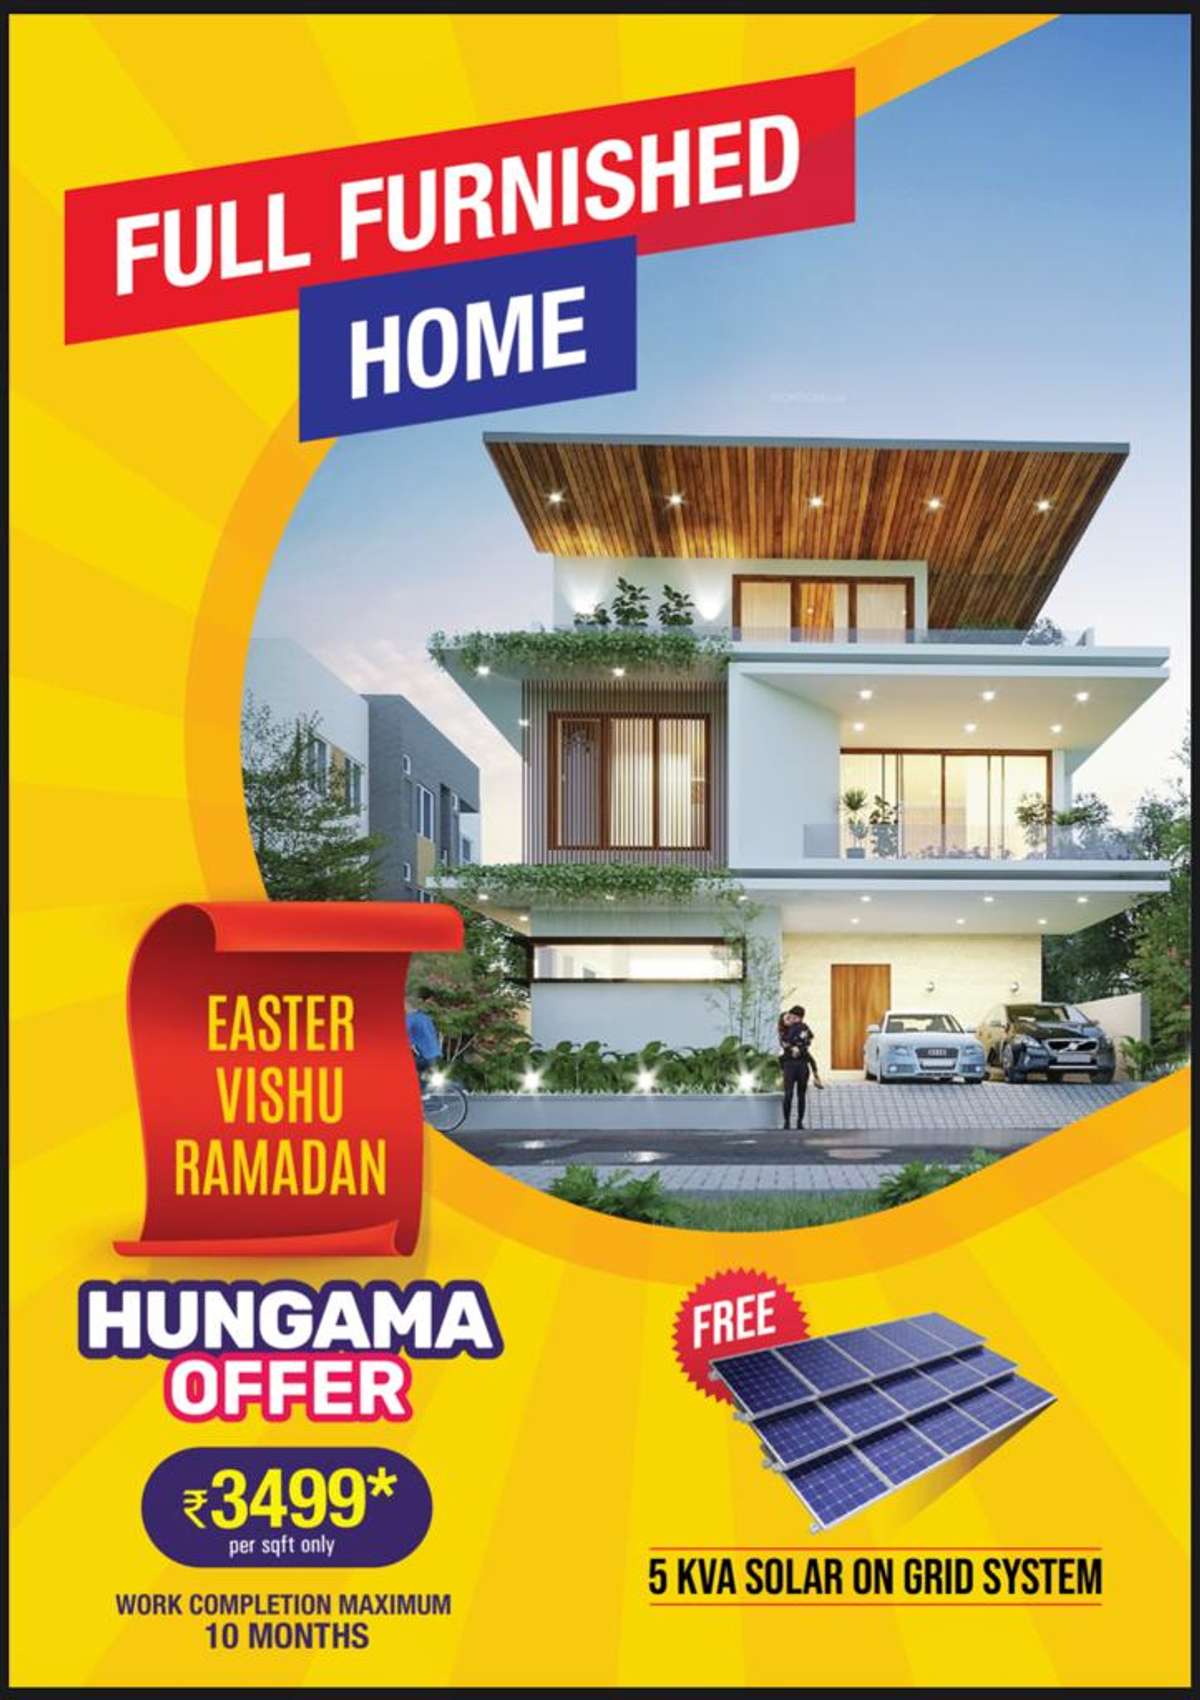 we are the turnkey solutions in Ernakulam, which provides A to Z services with 3 years free maintenance. We are the experts in dealing with challenging works. If you are searching for the best services in the market, here we are ready to help you... call @9497286117 .. Make a right choice for your beautiful dream. 😇  